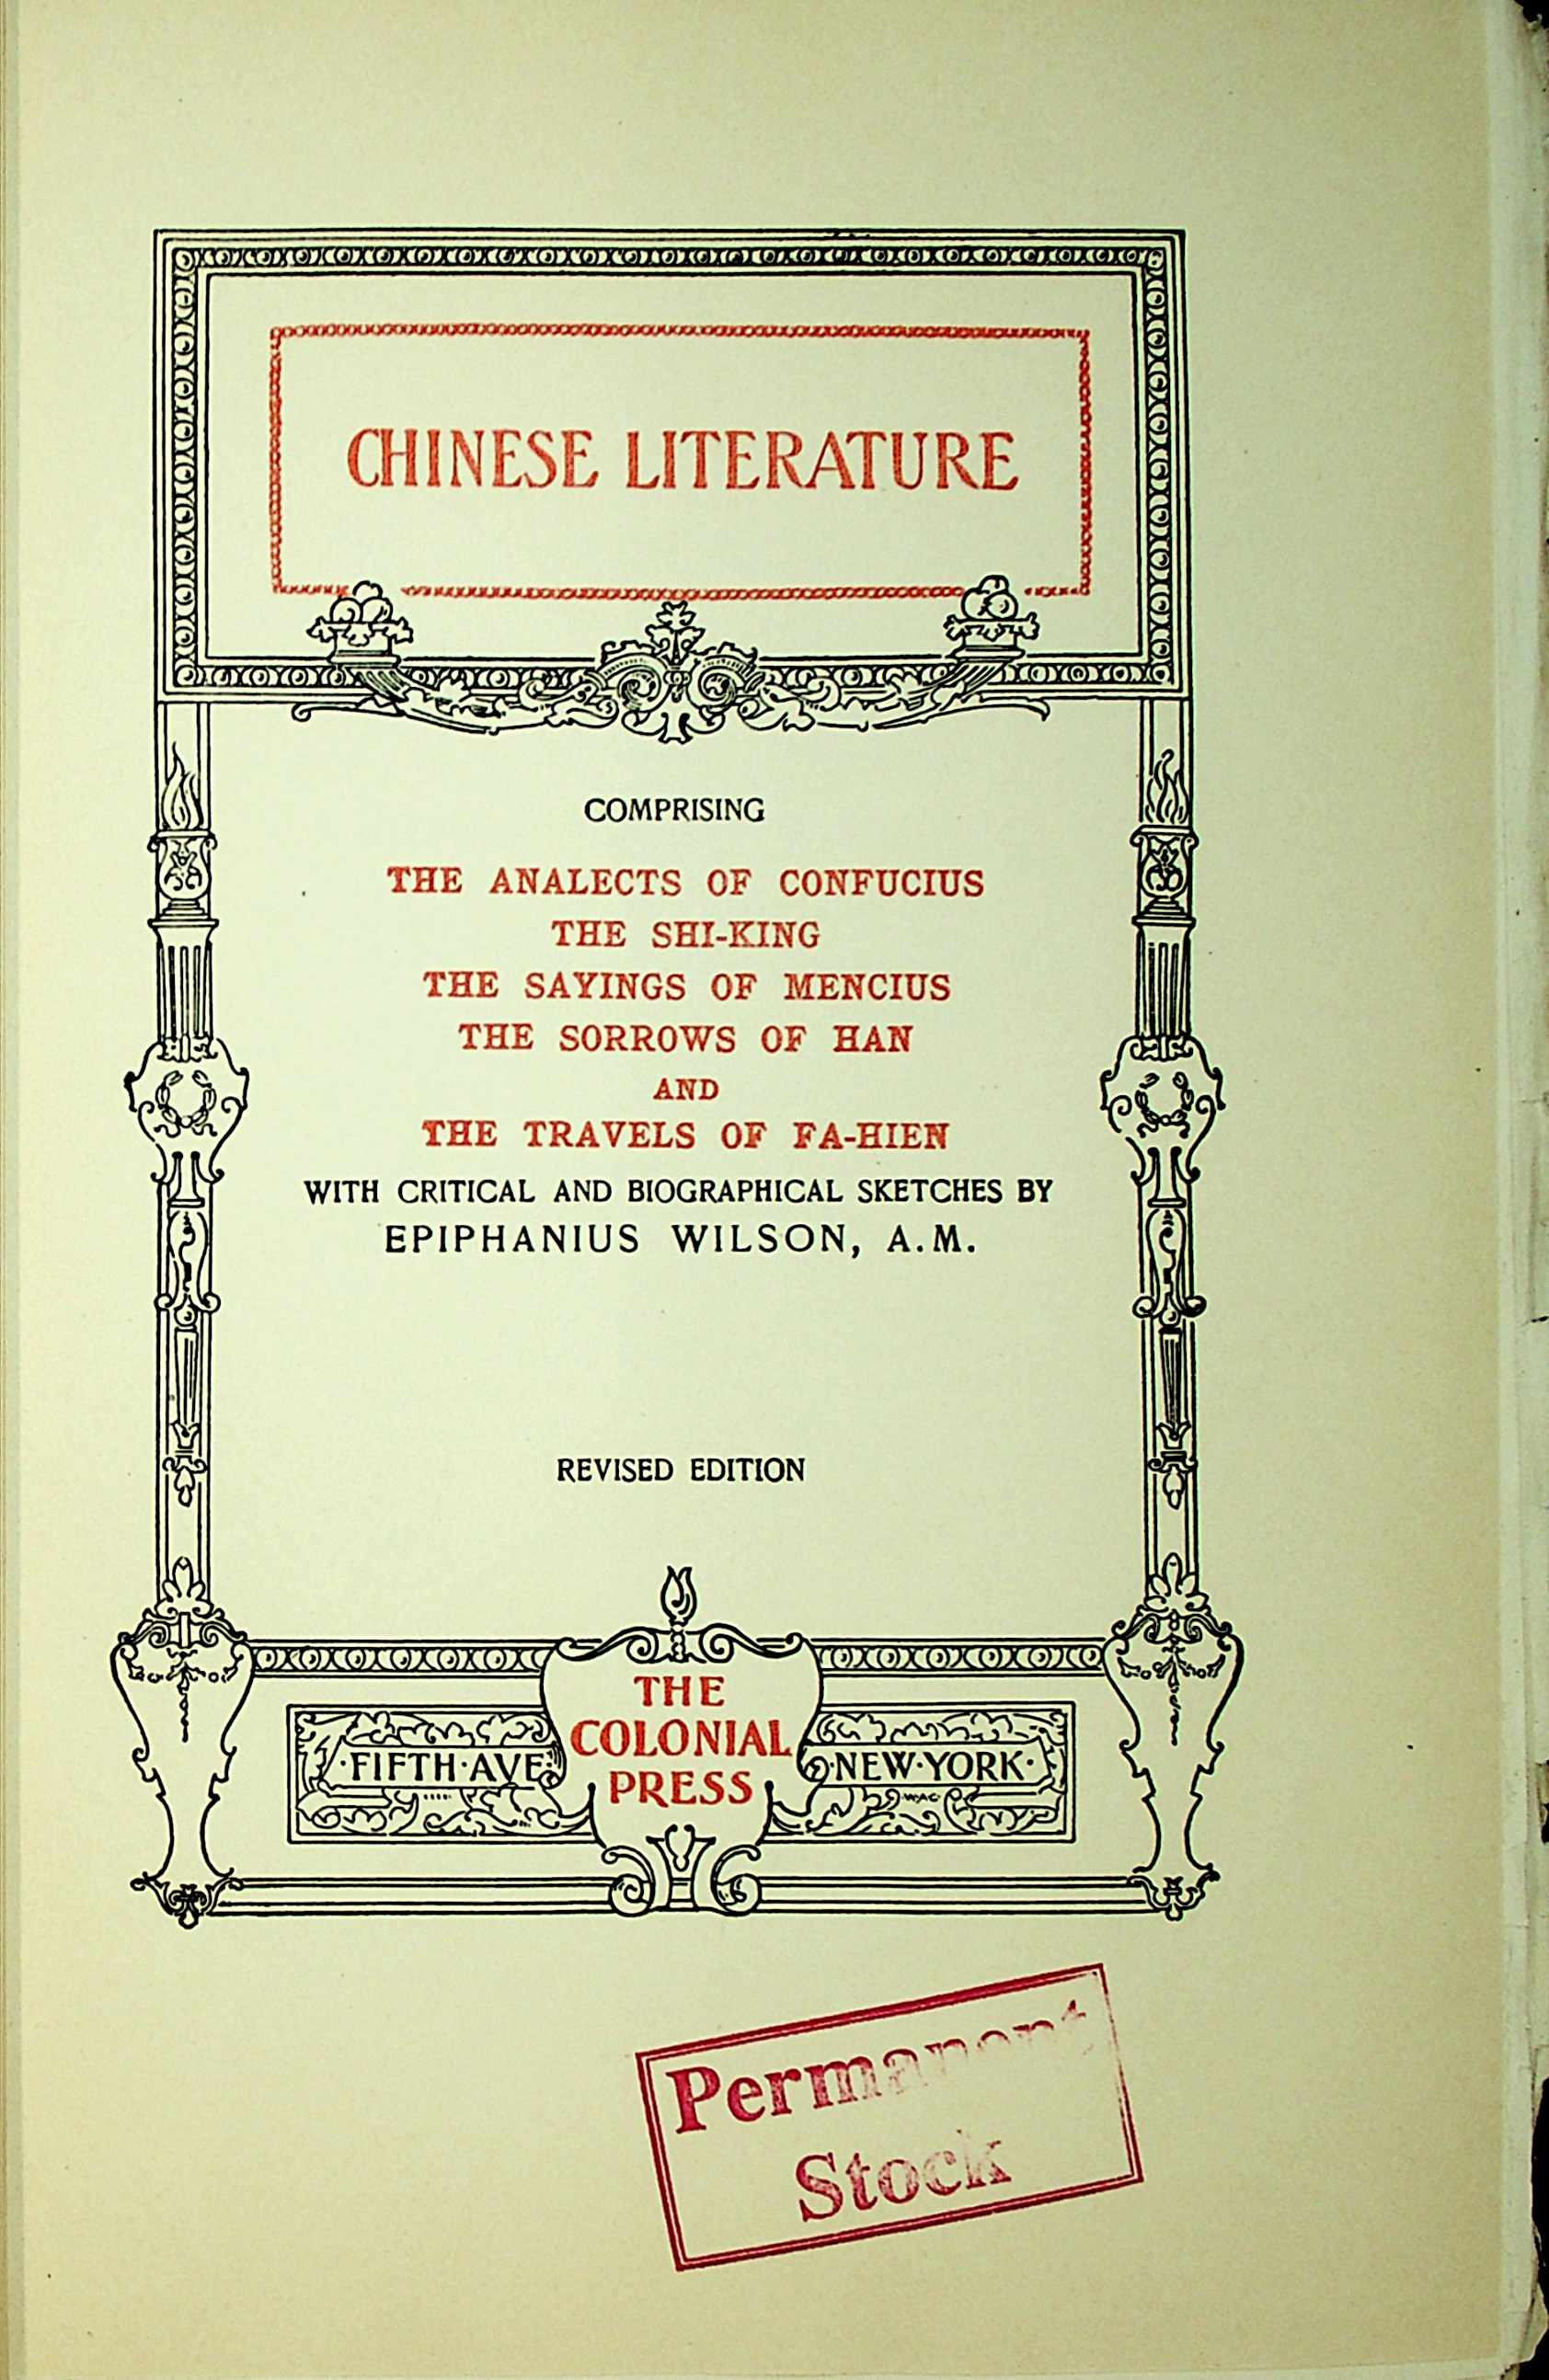 Chinese literature : comprising the Analects of Confucius, the Shi-King, the Sayings of Mencius, the Sorrows of Han, and the Travels of Fa-Hien ; Arabian literature : comprising Arabian poetry, The romance of Antar and Arabian nights